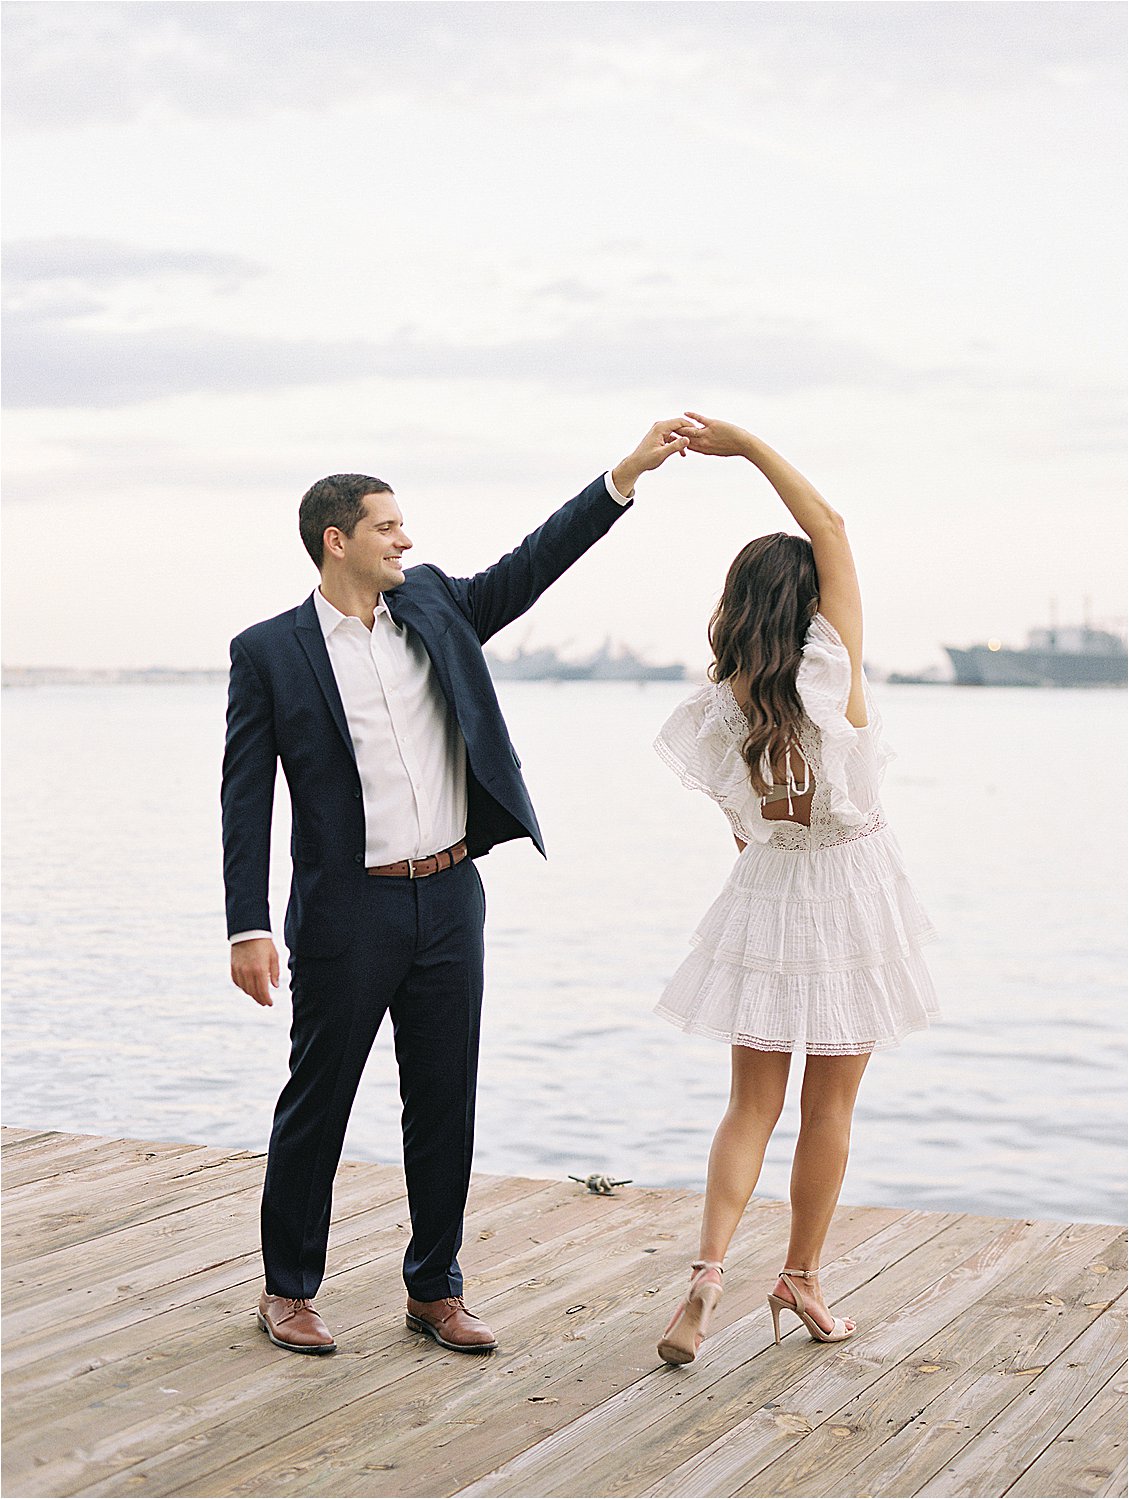 Romantic engagement session in Fells Point Baltimore with film photographer, Renee Hollingshead